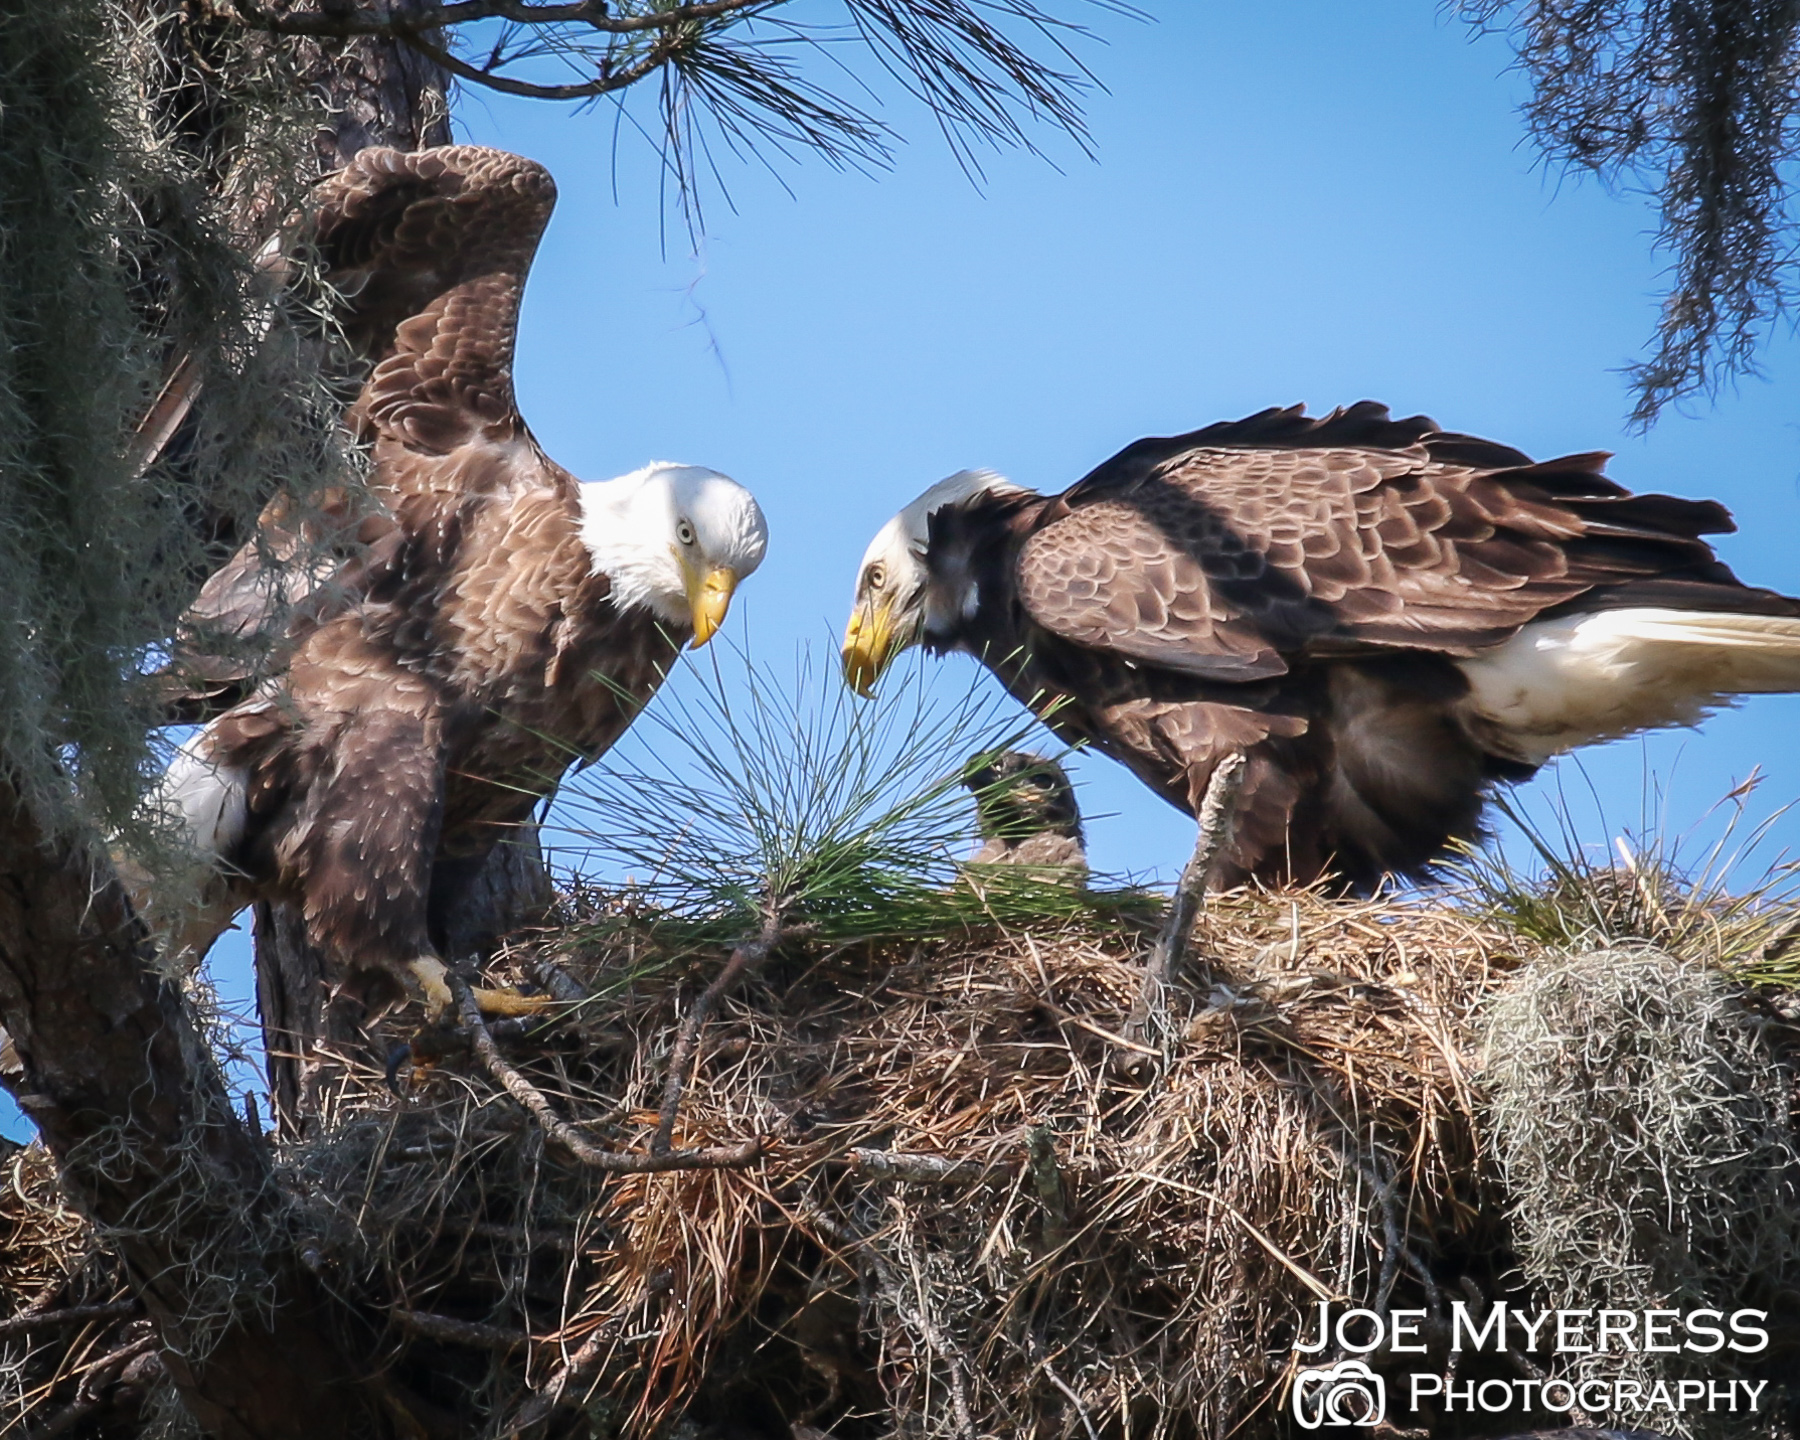 Watching a Bald Eagle family…